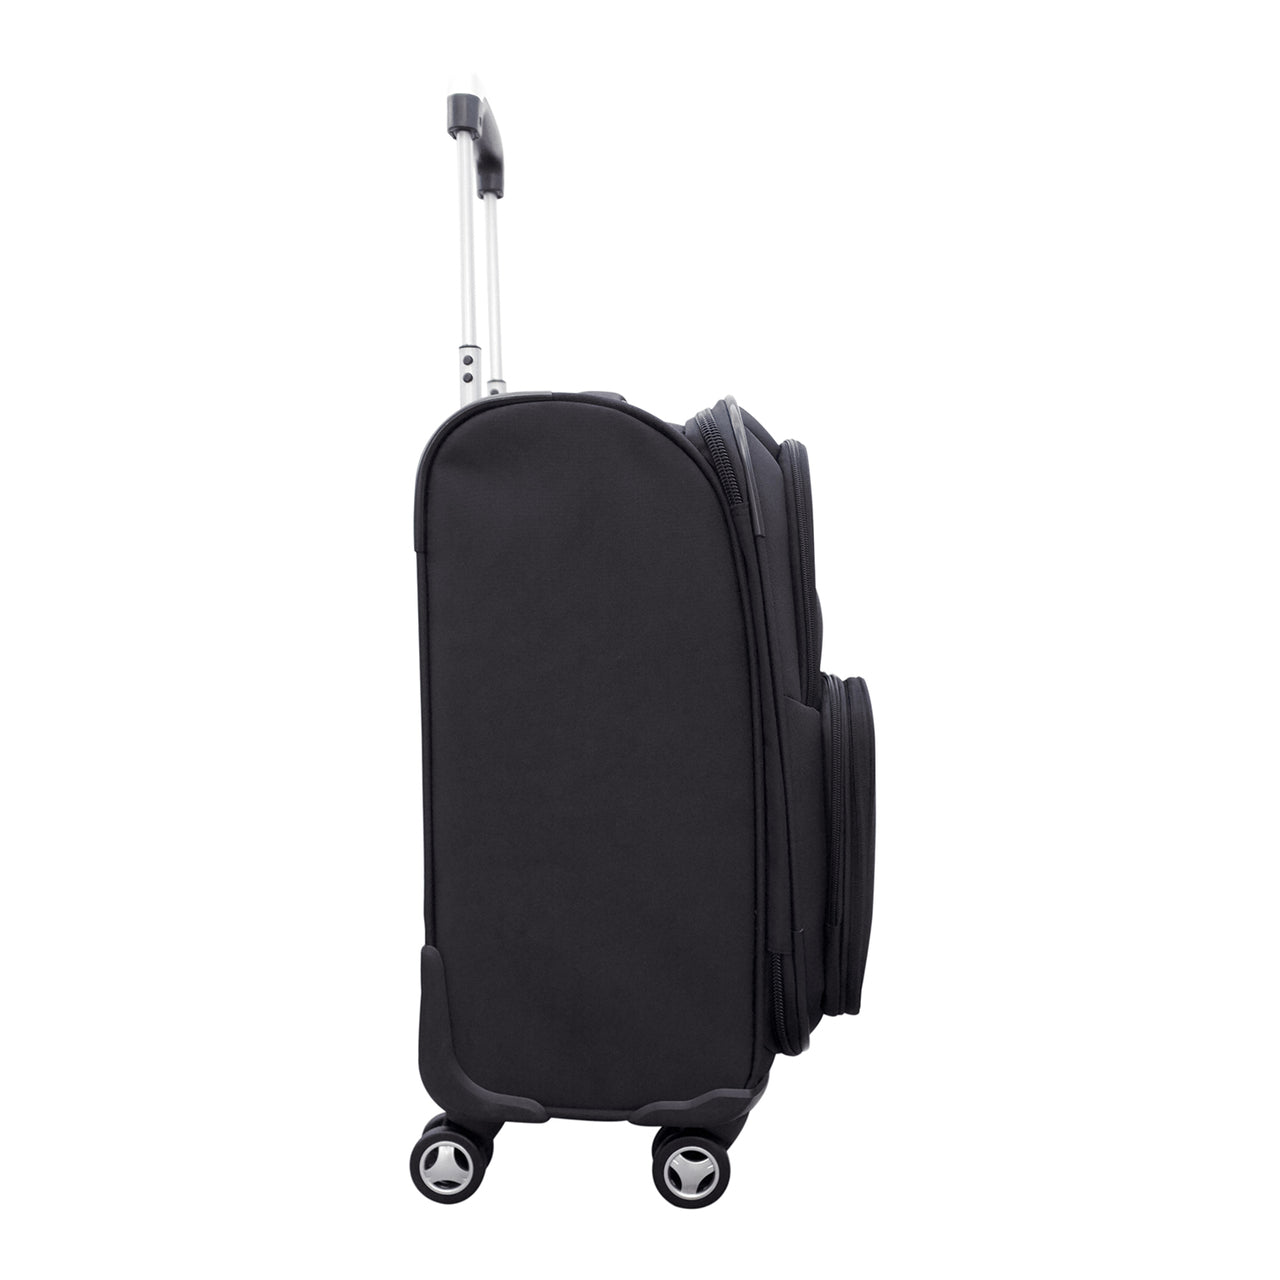 Green Bay Packers 21" Carry-on Spinner Luggage